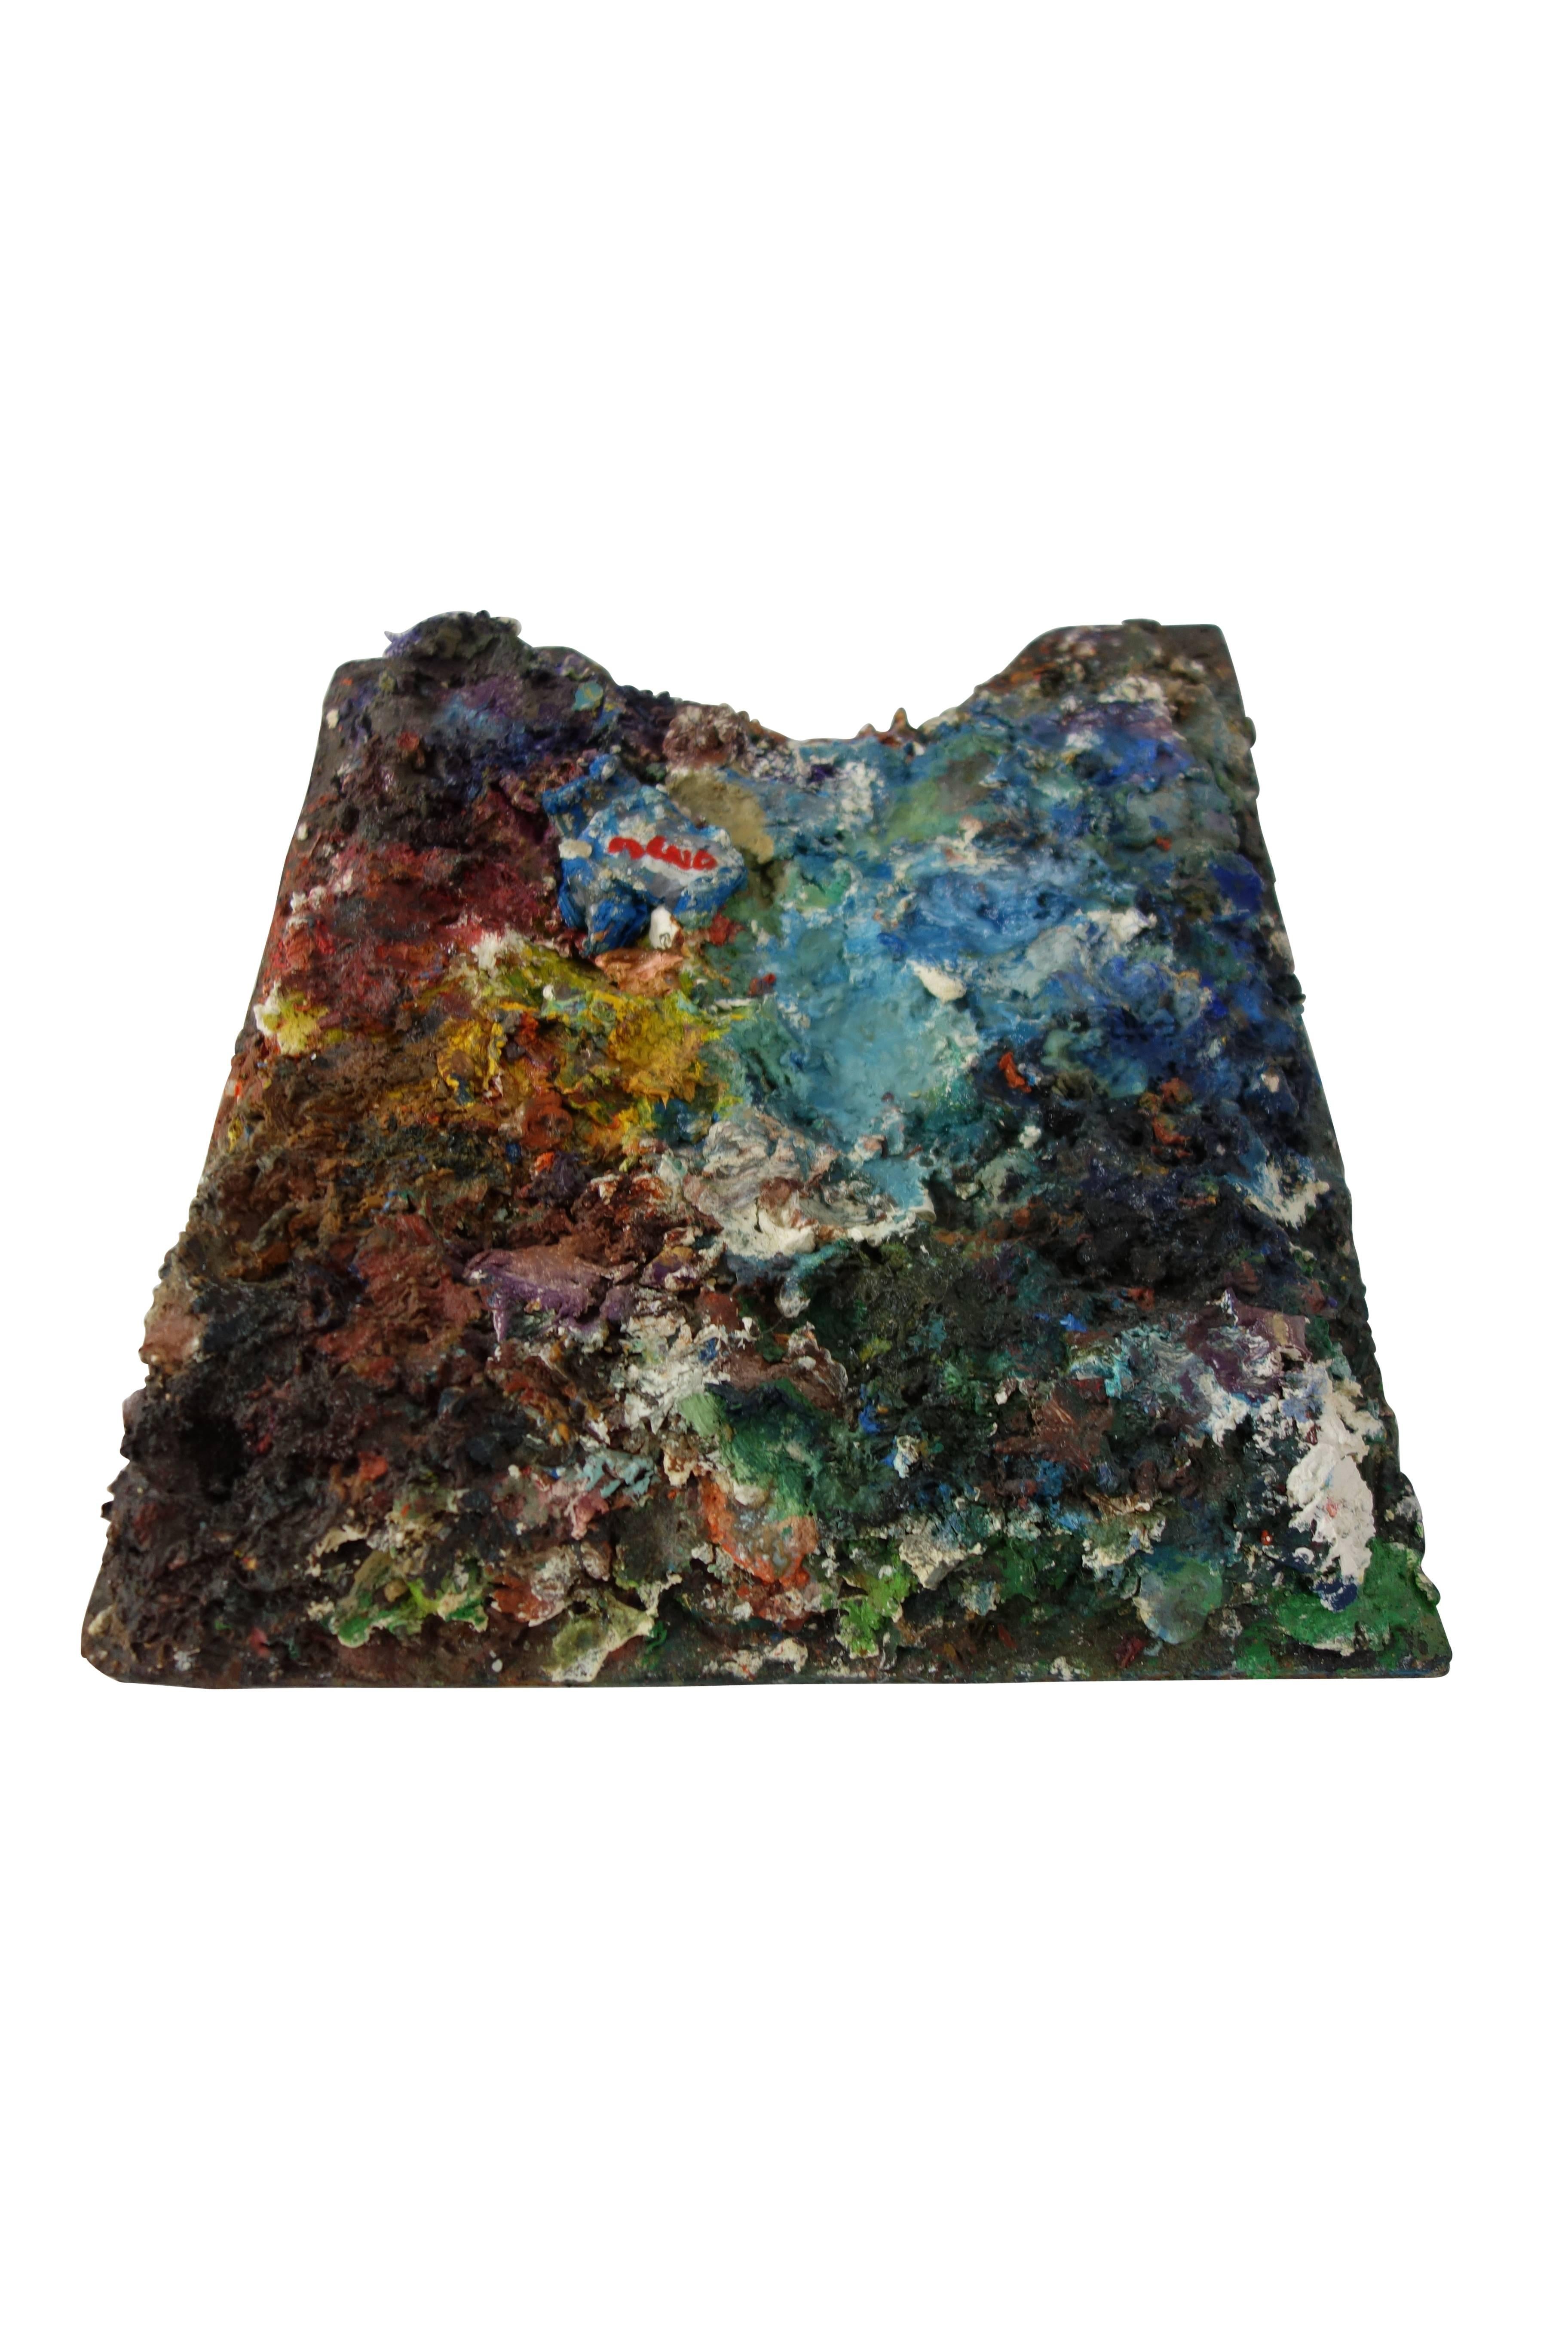 This is a colorful artist’s paint palette with years of paint build up giving it fantastic texture, circa 1970 signed 